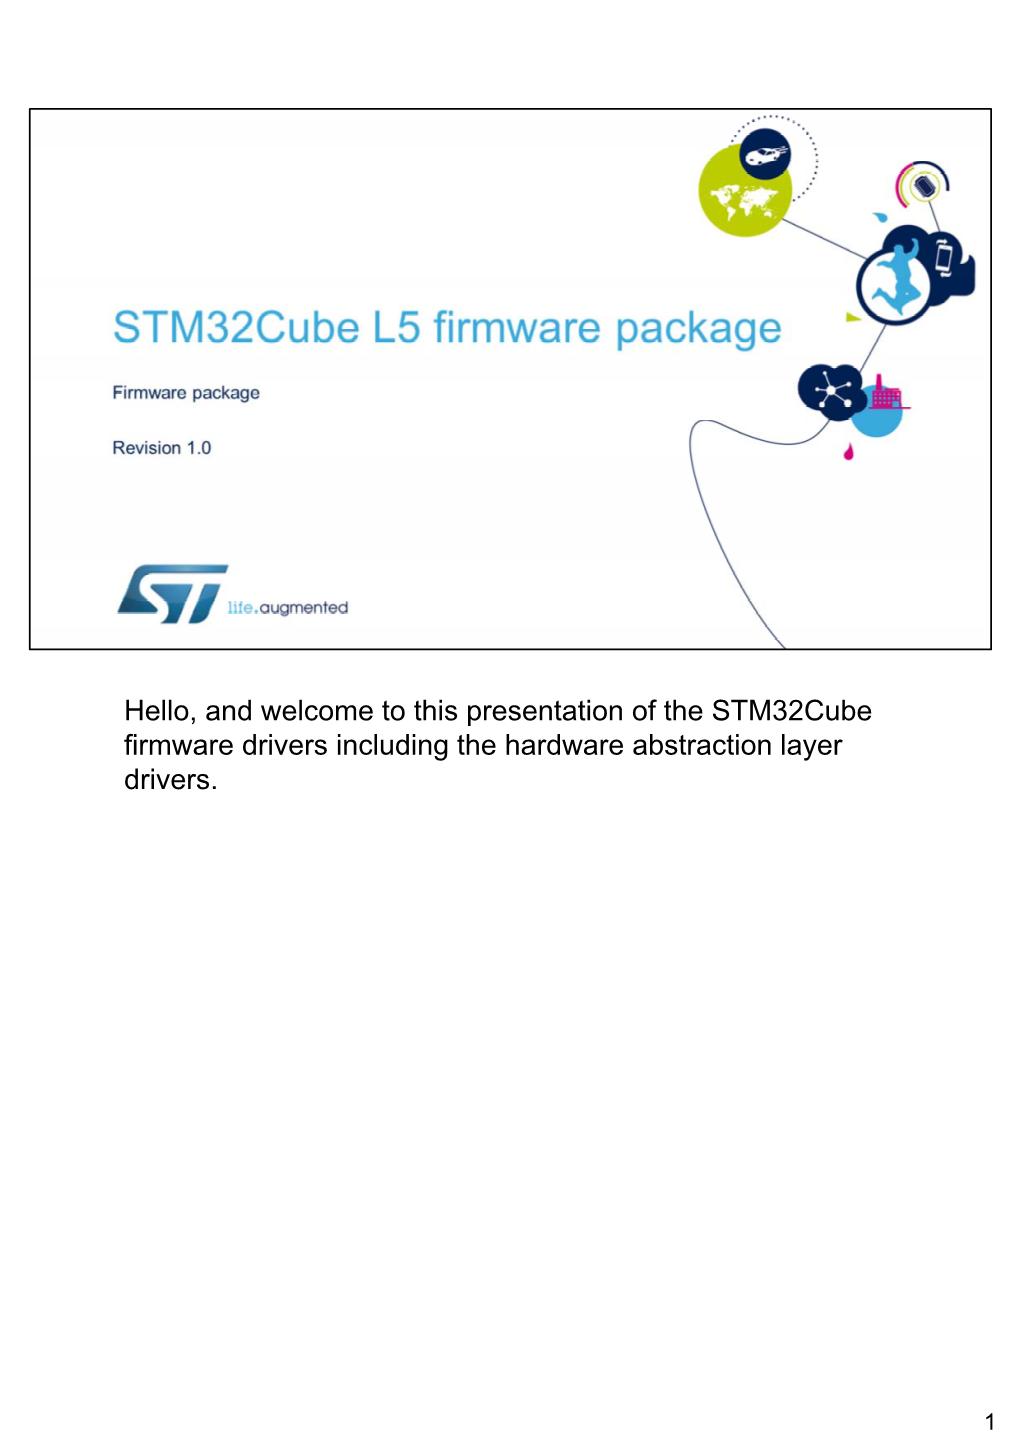 Hello, and Welcome to This Presentation of the Stm32cube Firmware Drivers Including the Hardware Abstraction Layer Drivers